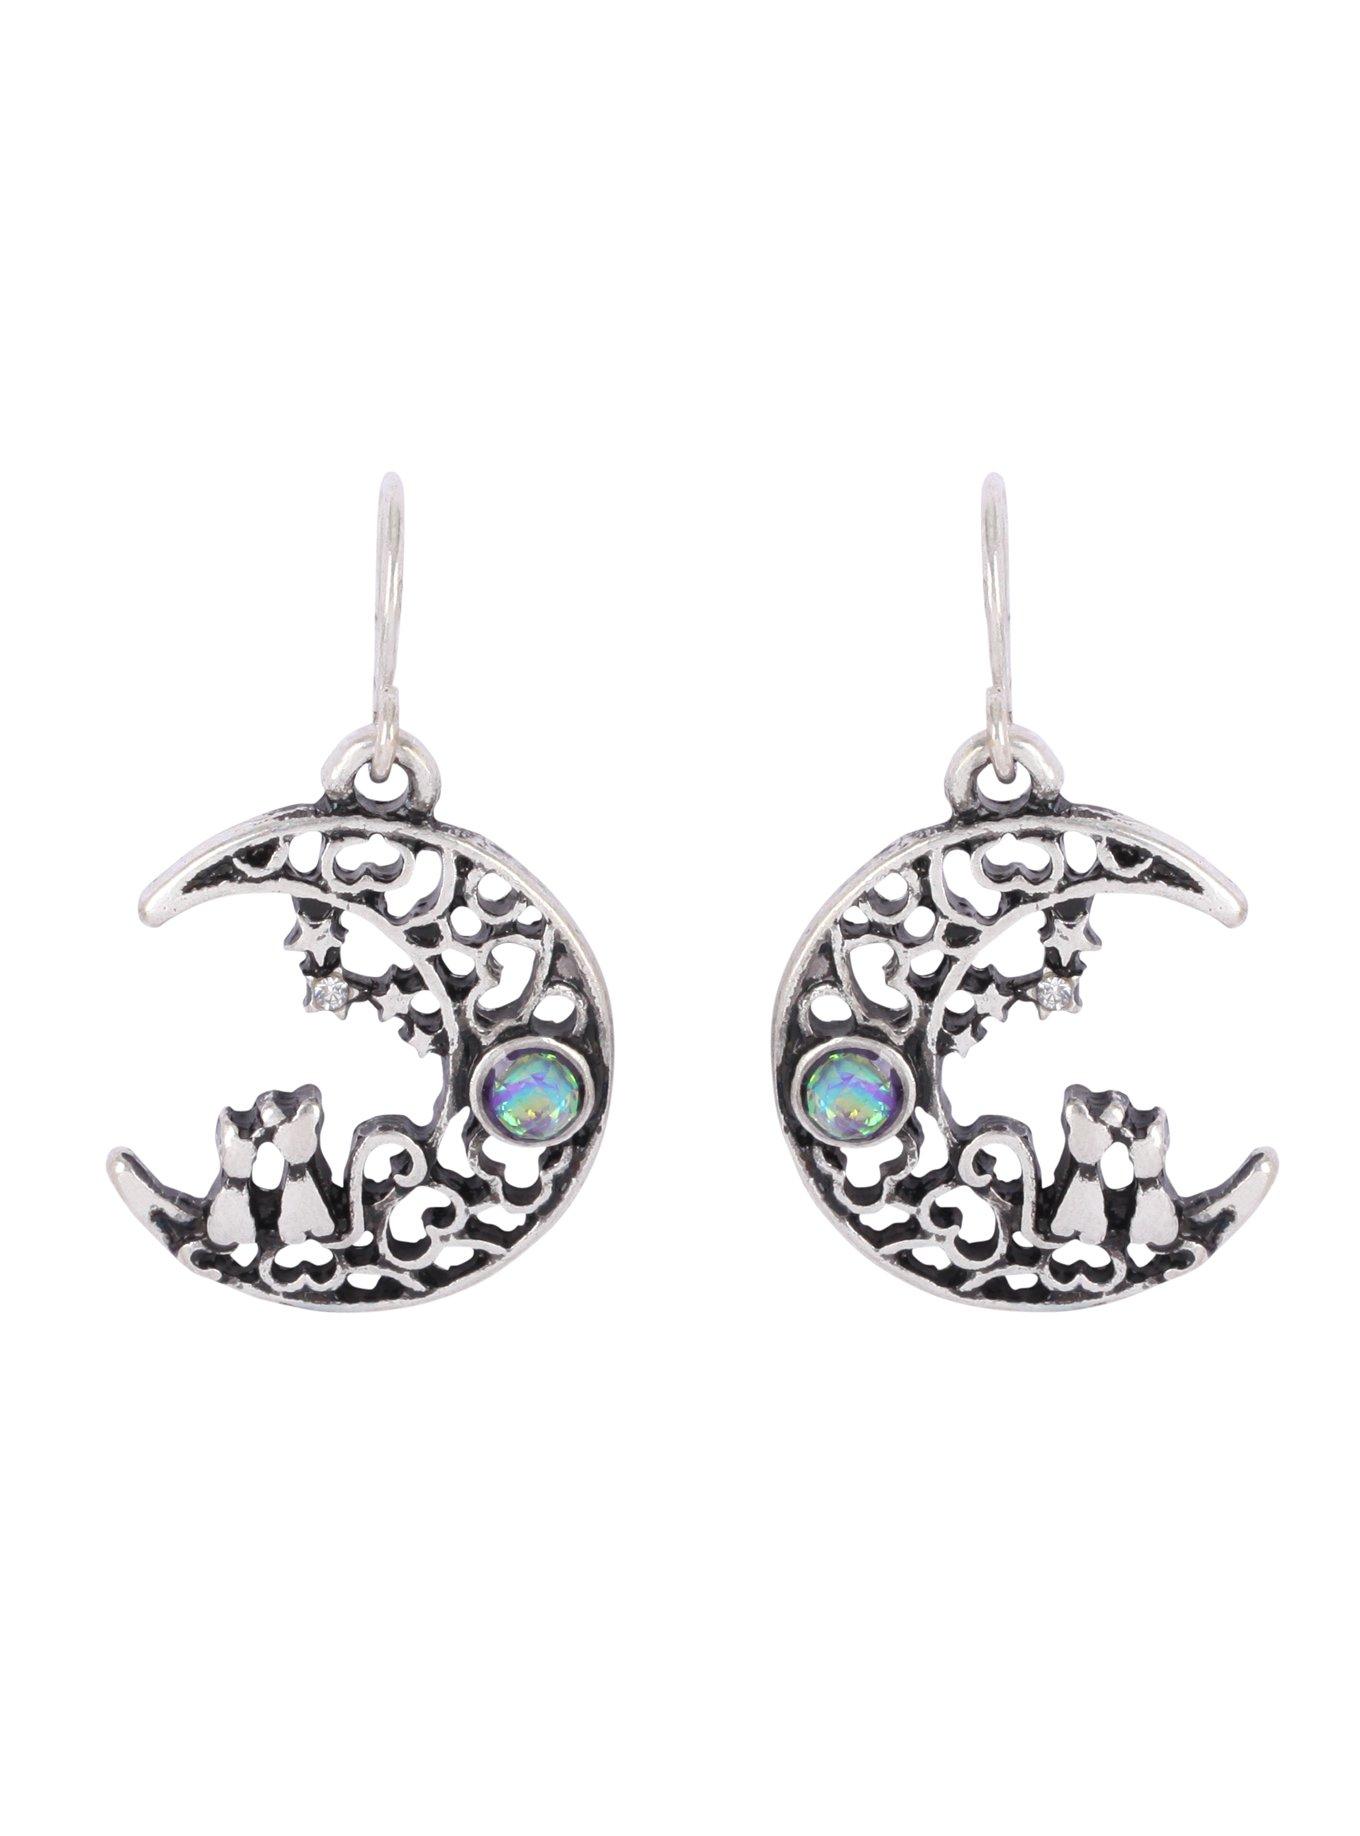 Lovesick Burnished Silver Filigree Moon and Blue Opal Earrings, , hi-res